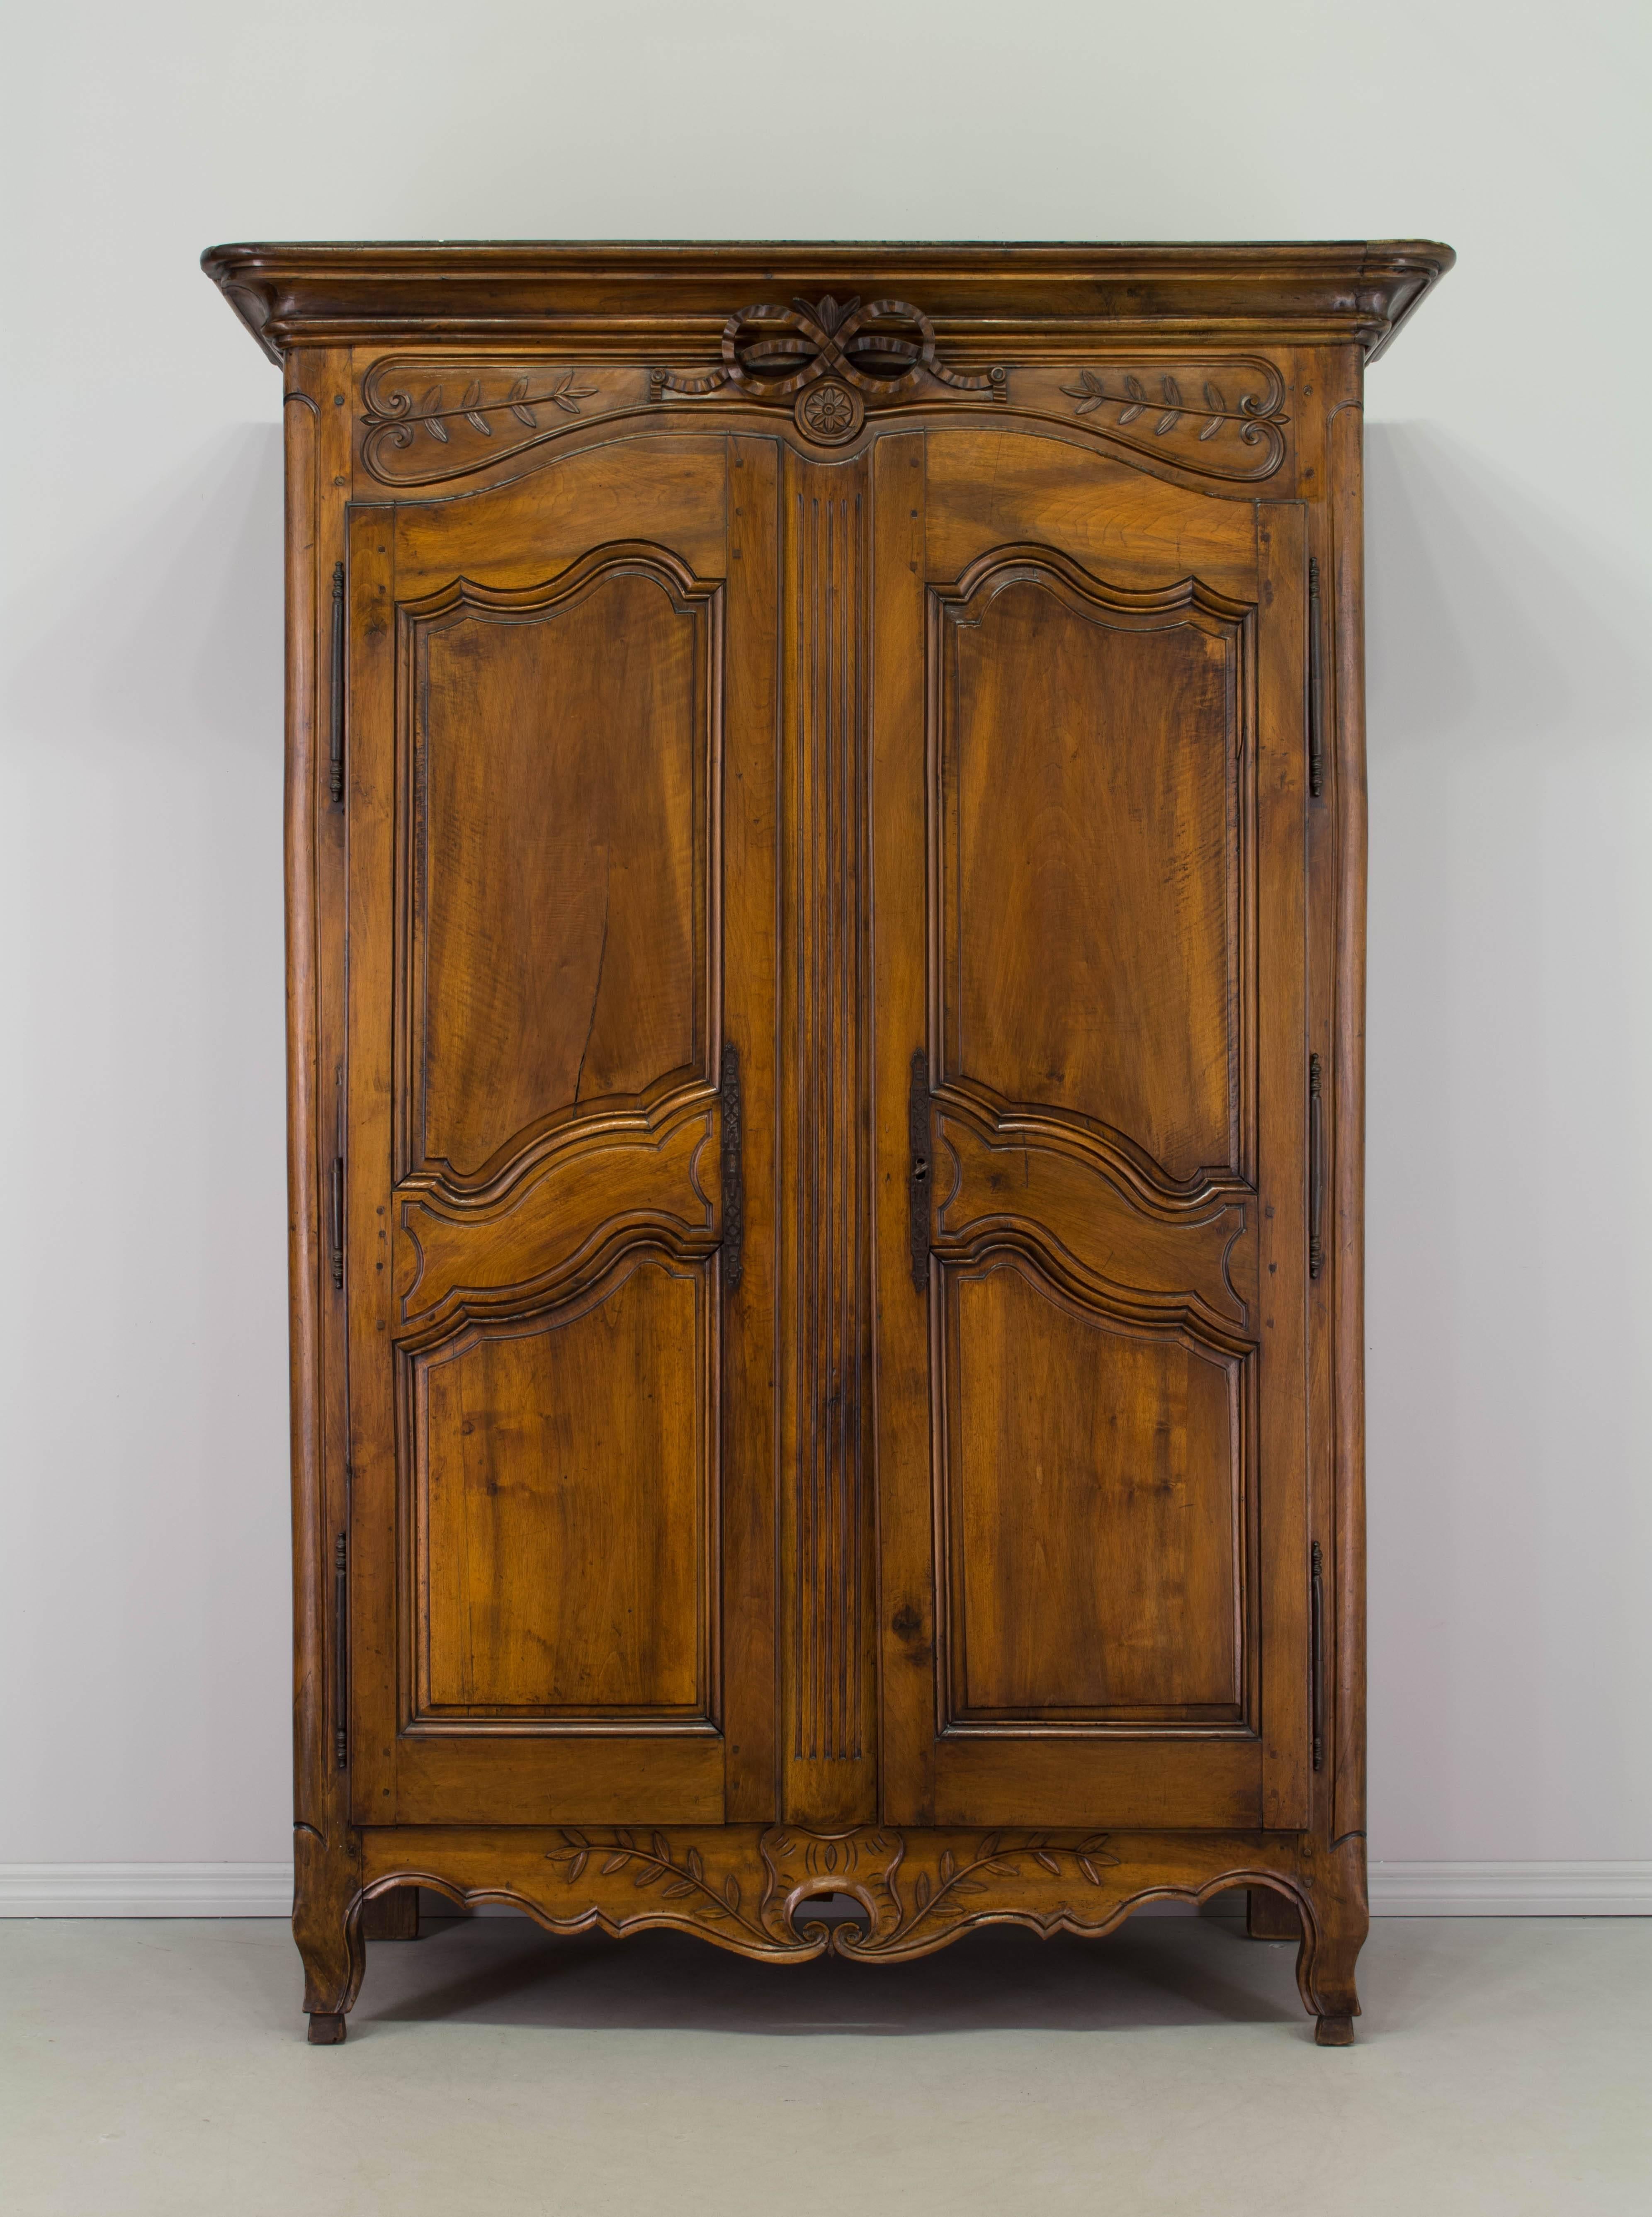 18th century French Louis XV bridal armoire for Provence made of sold walnut with raised panel doors, a pierced apron and a carved wedding ribbon below a molded crown. Three raised panels on the sides, mortise and tenon joints and pegged